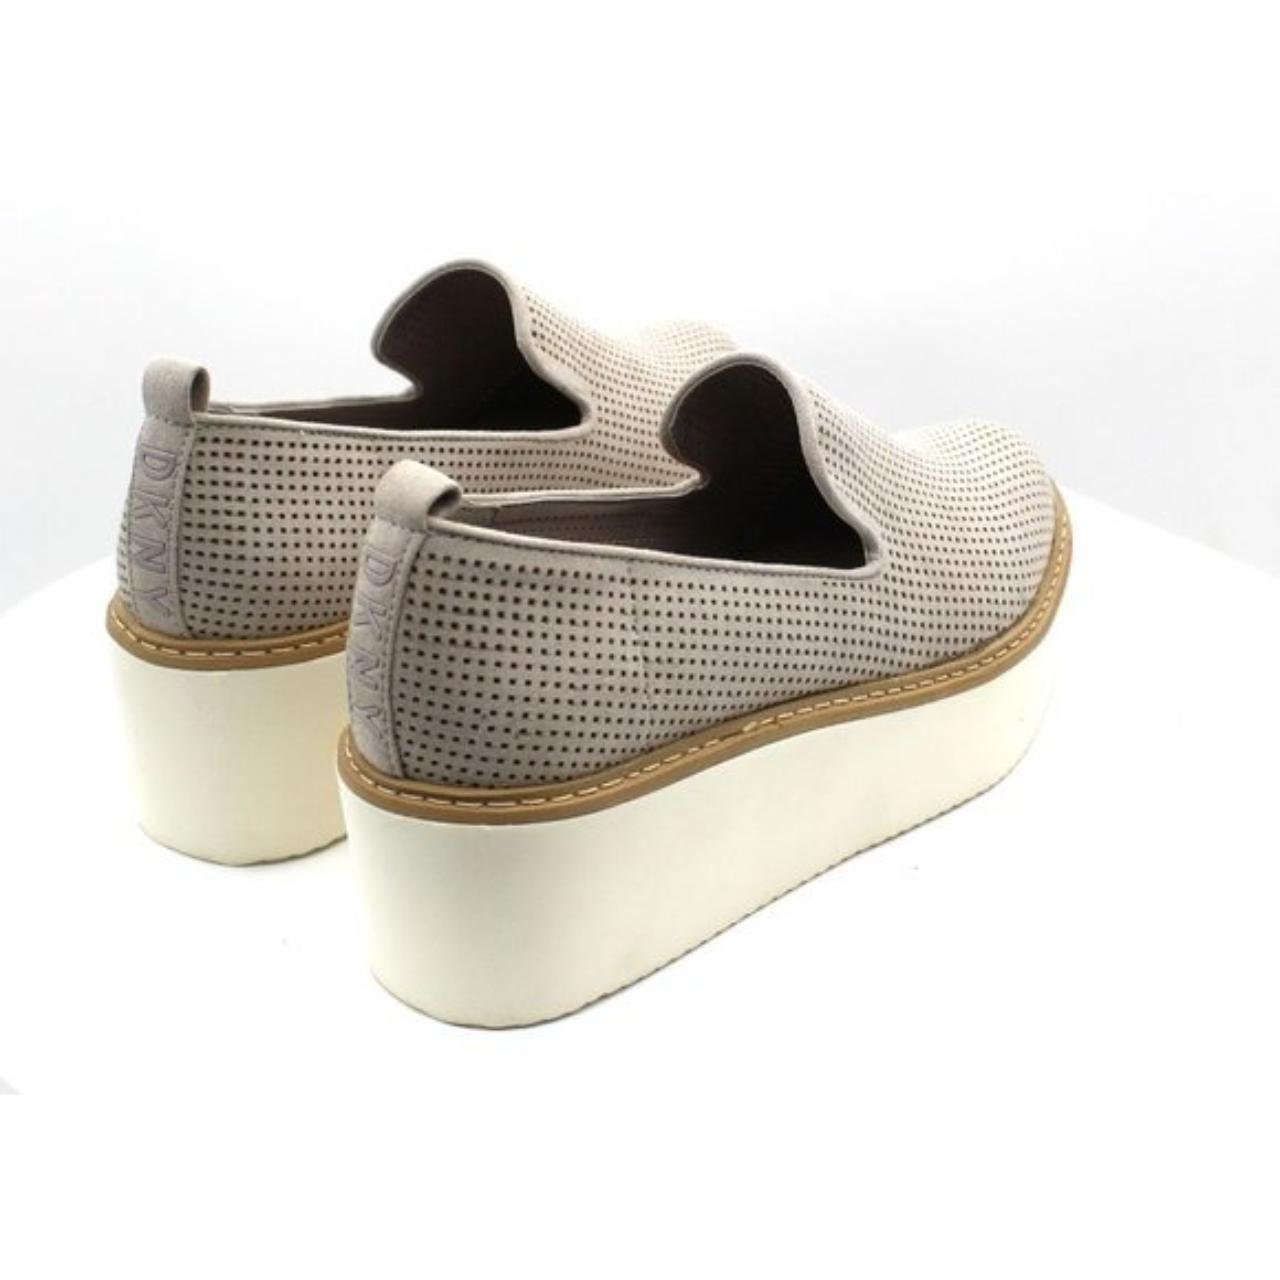 Product Image 3 - Dkny Bari Platform Sneakers

Add contemporary